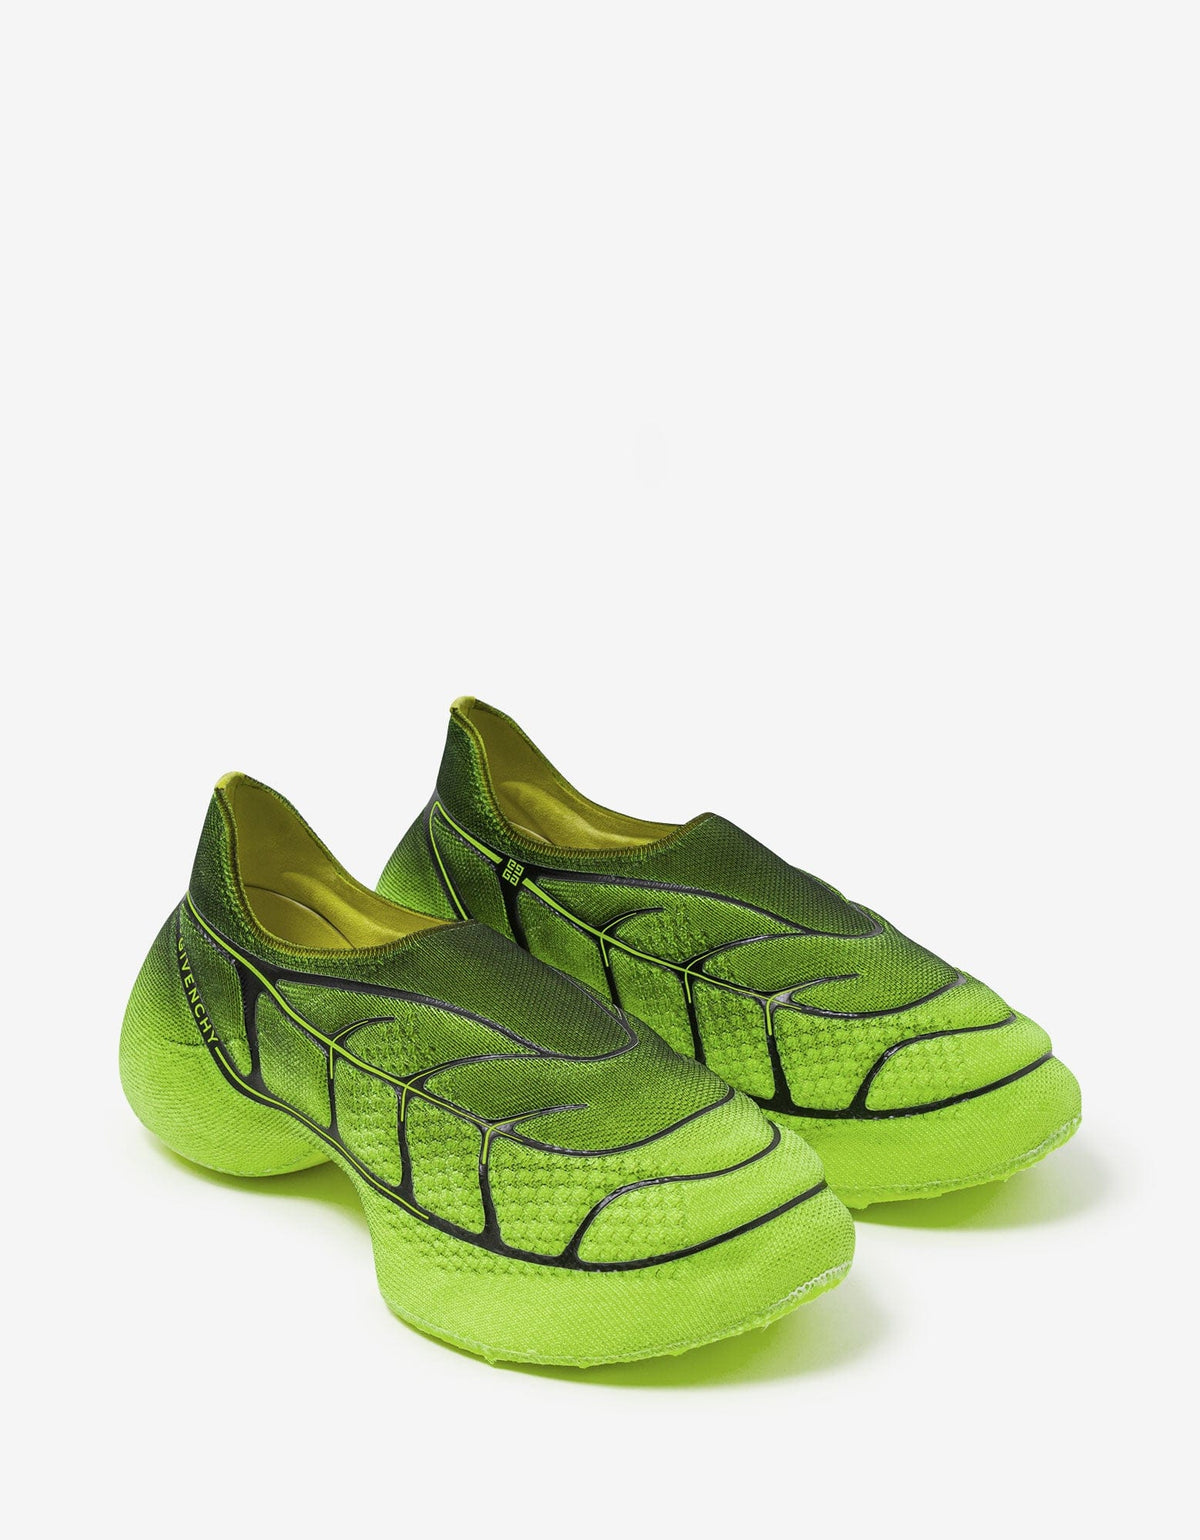 Givenchy Fluorescent Yellow TK-360 Plus Trainers